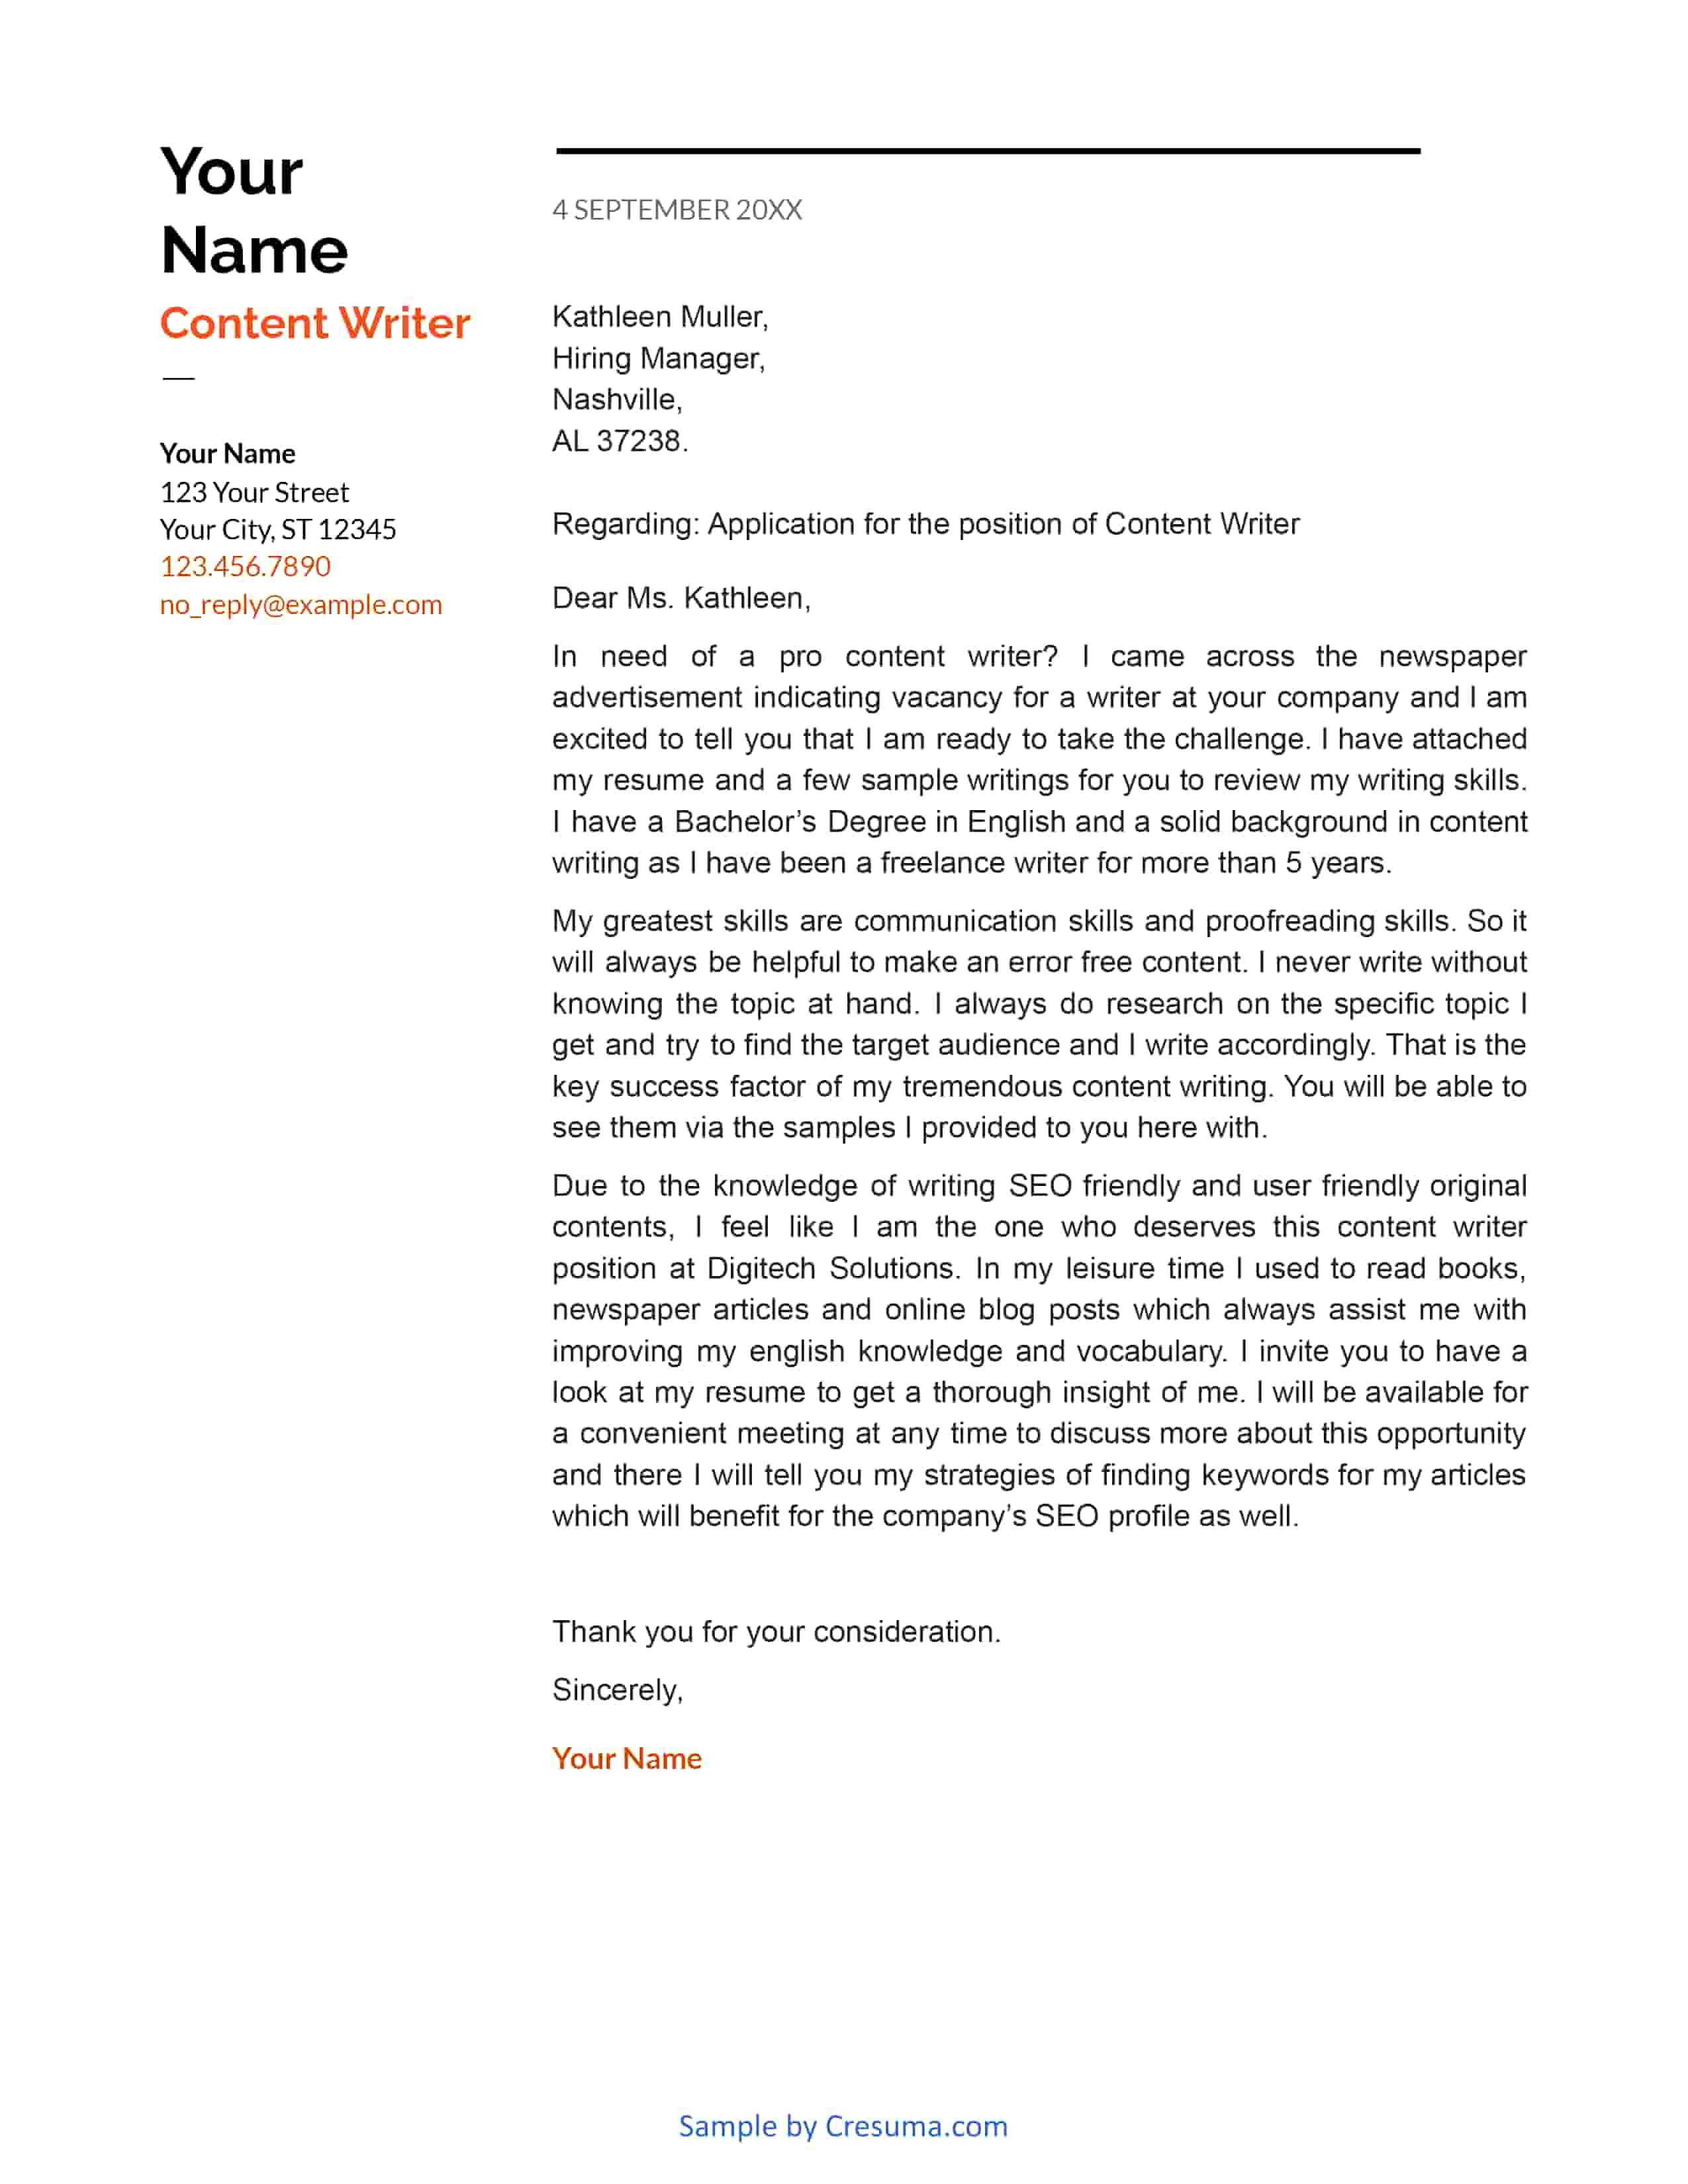 cover letter for content writer with experience